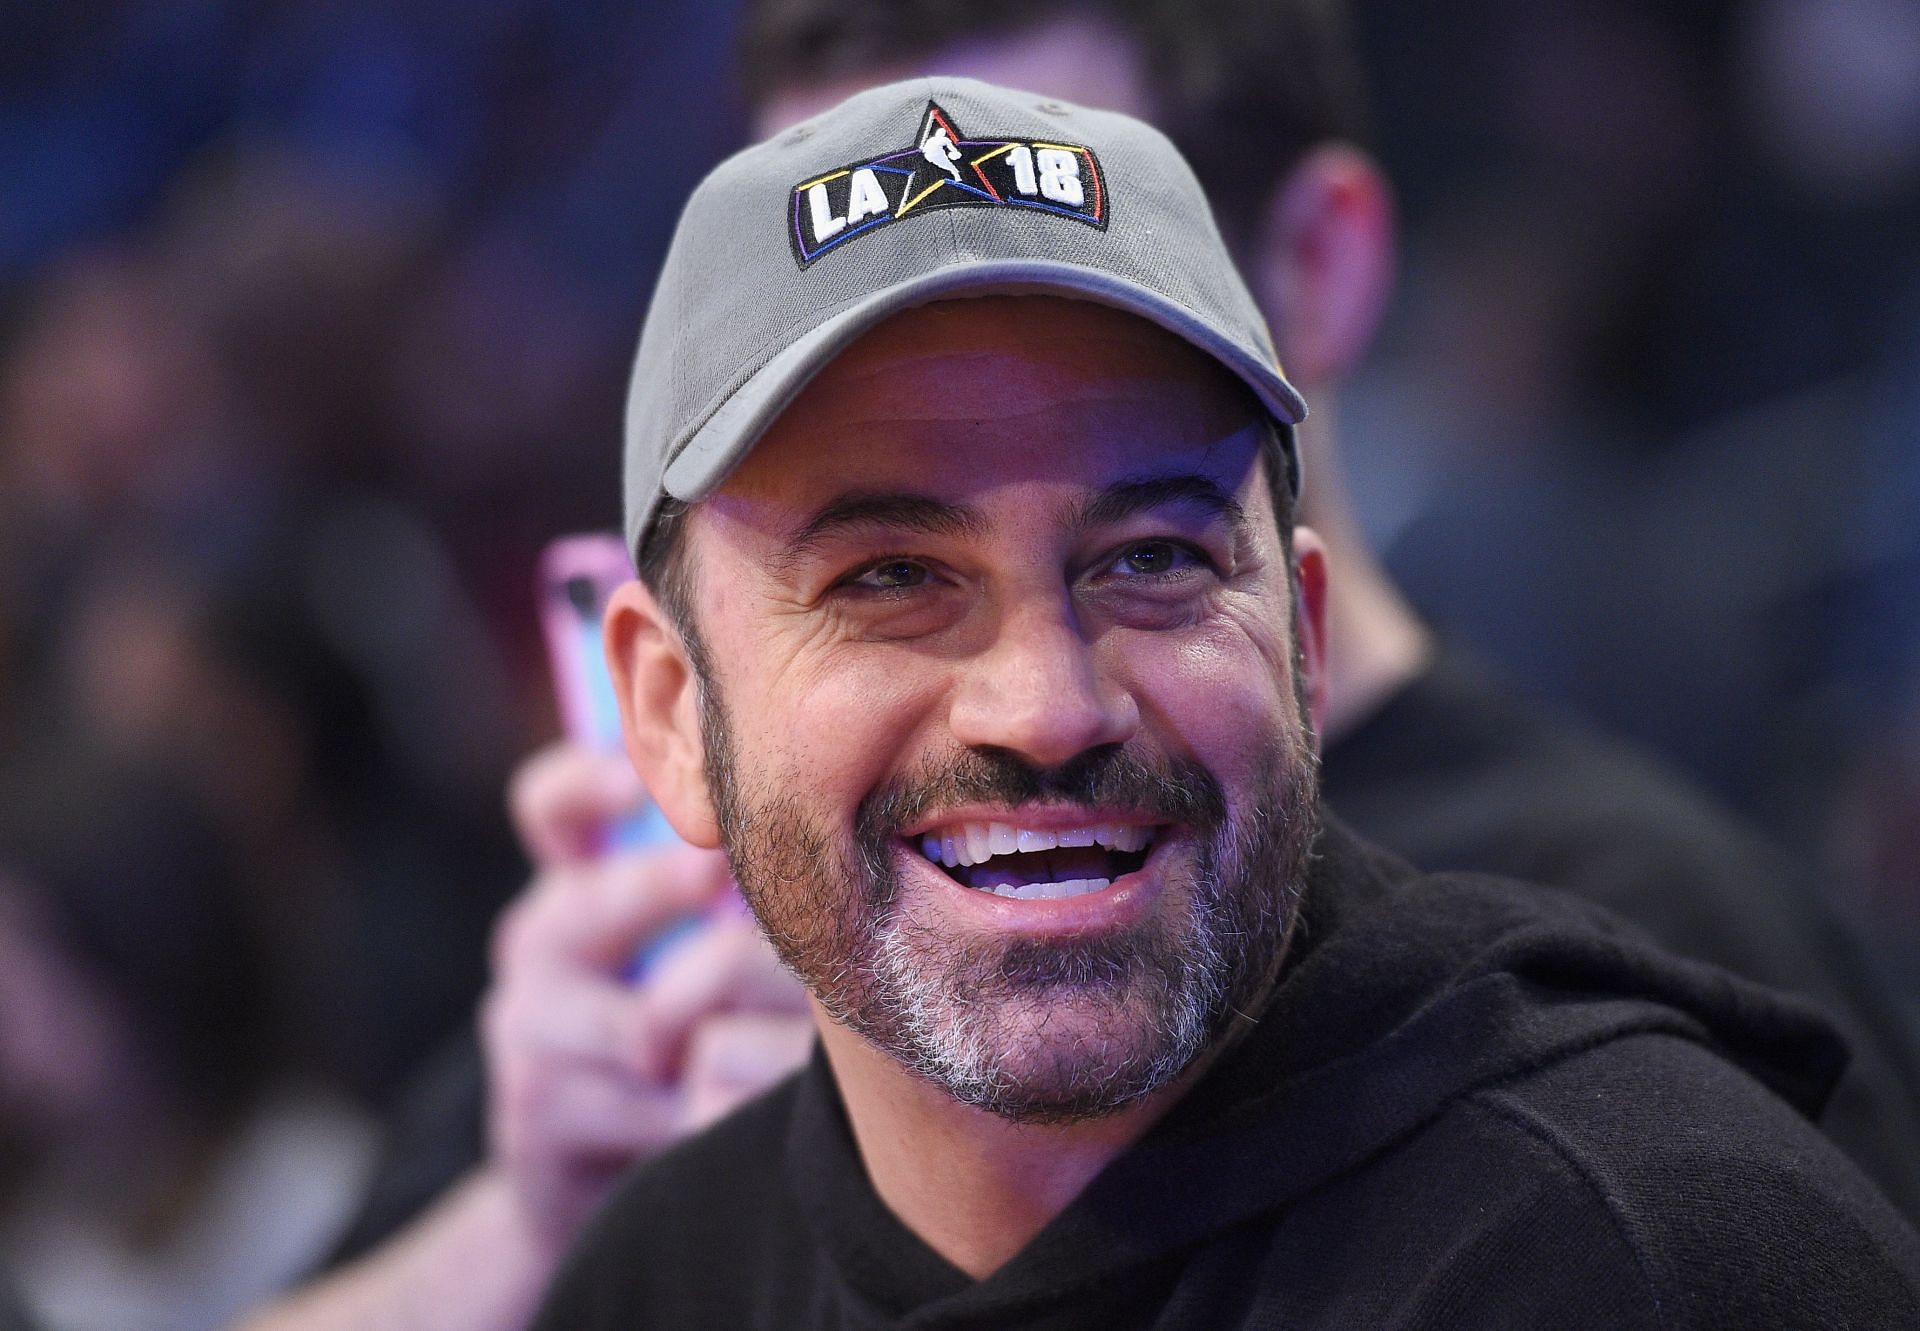 Jimmy Kimmel at the NBA All-Star Game 2018